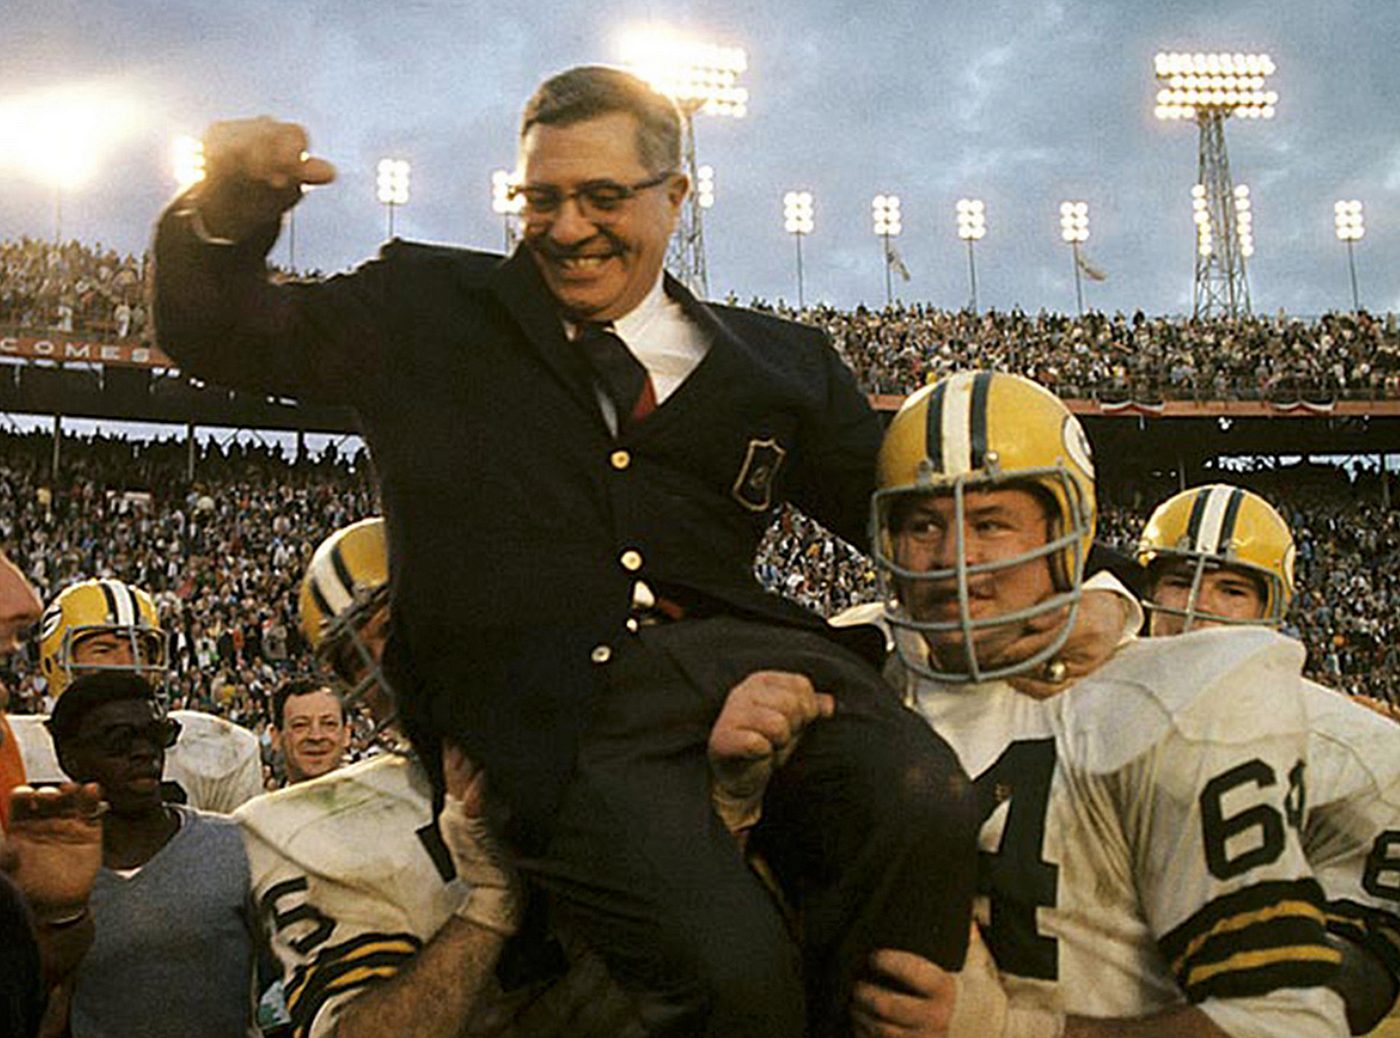 Footbaall players lifting Vince Lombardi while wearing a black suit